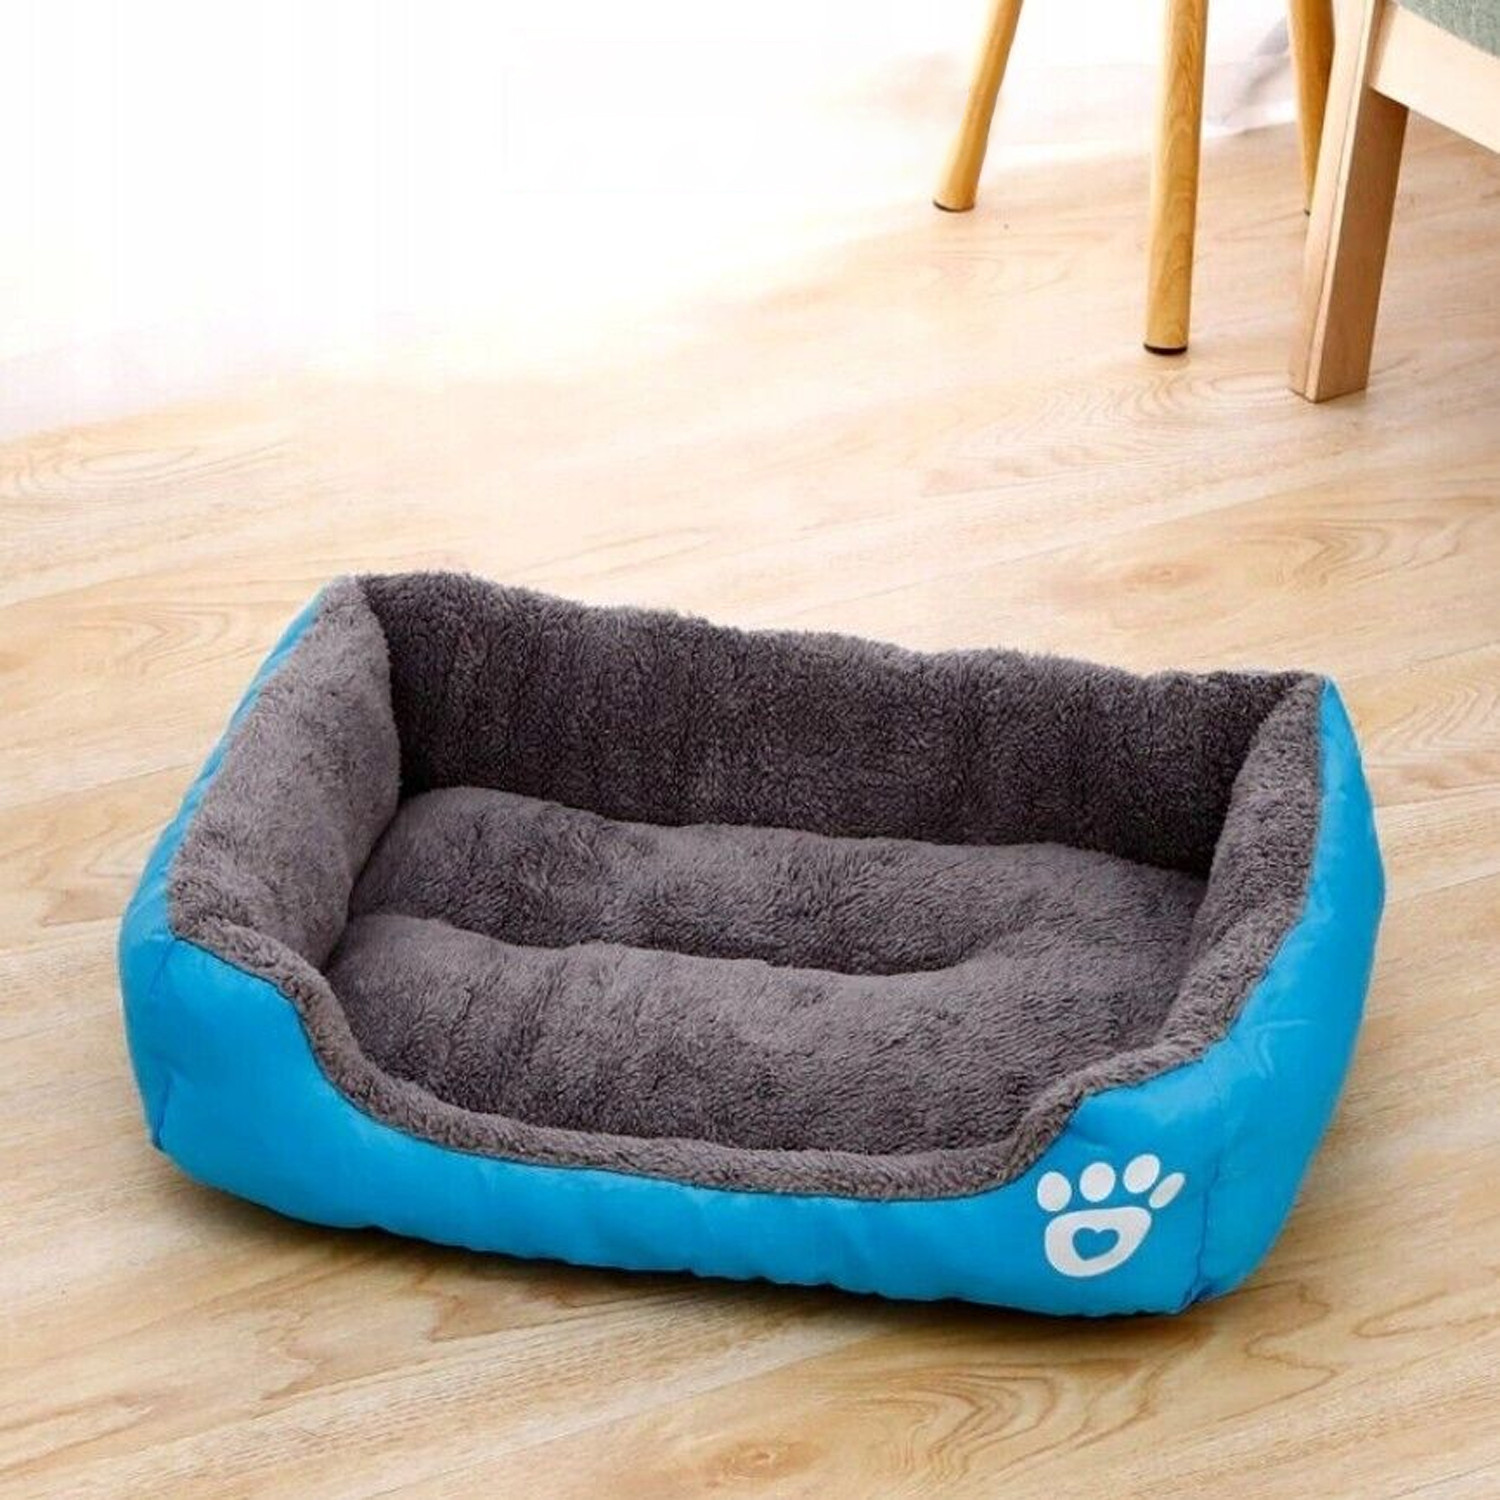 Kuber Industries Dog & Cat Bed|Super Soft Plush Top Pet Bed|Oxford Cloth Polyester Filling|Machine Washable Dog Bed|Rectangular Cat Bed with Rise-Edge Pillow|QY036B-L|Sky Blue